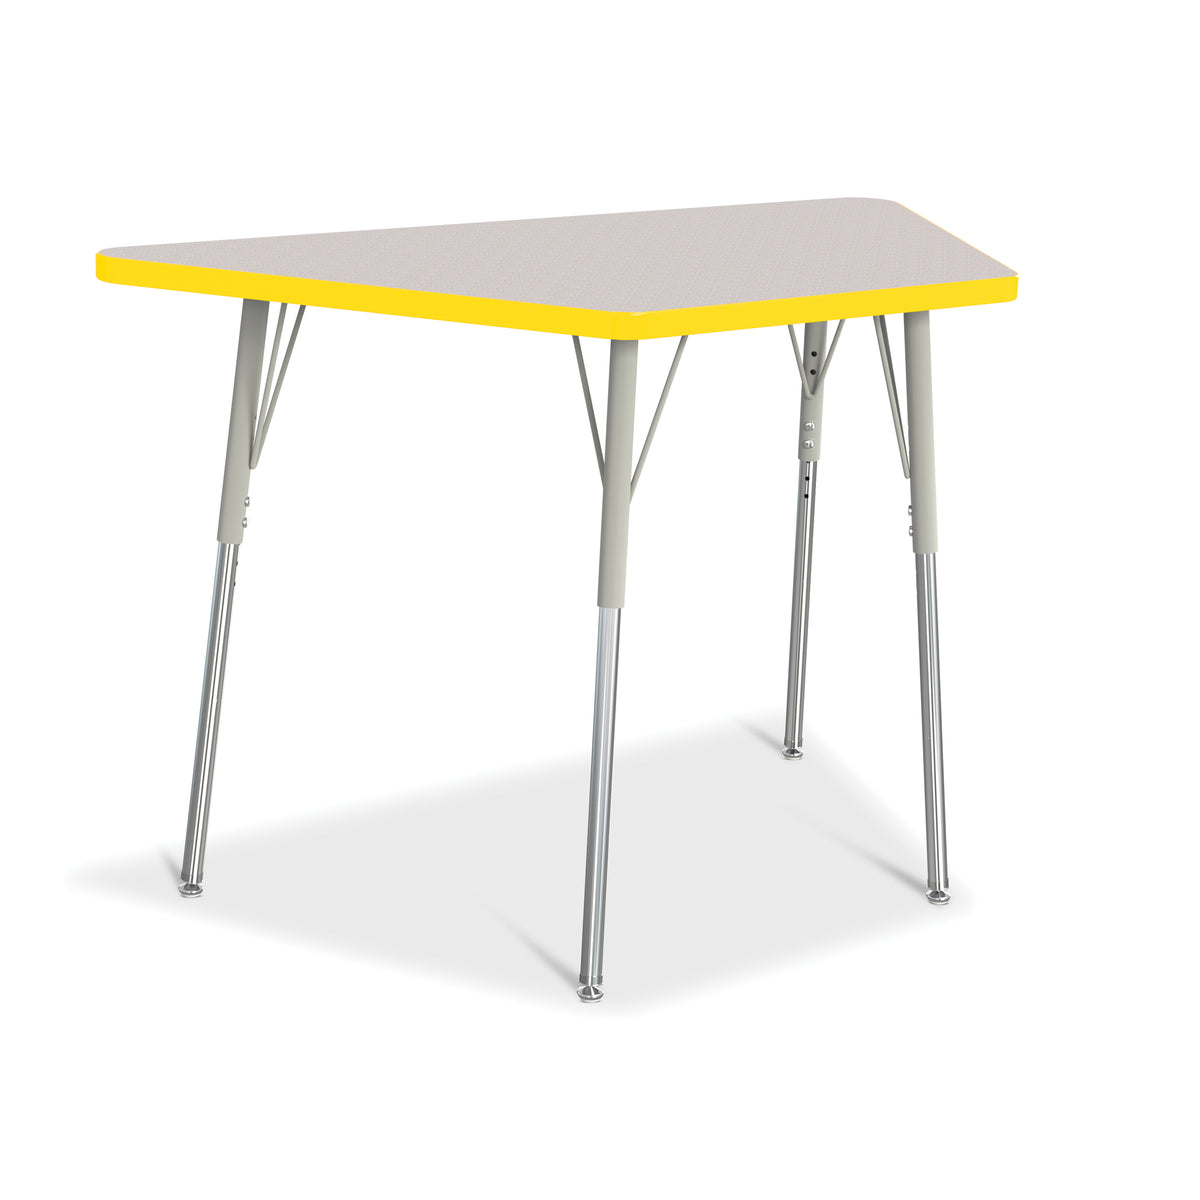 6438JCA007, Berries Trapezoid Activity Tables - 24" X 48", A-height - Freckled Gray/Yellow/Gray